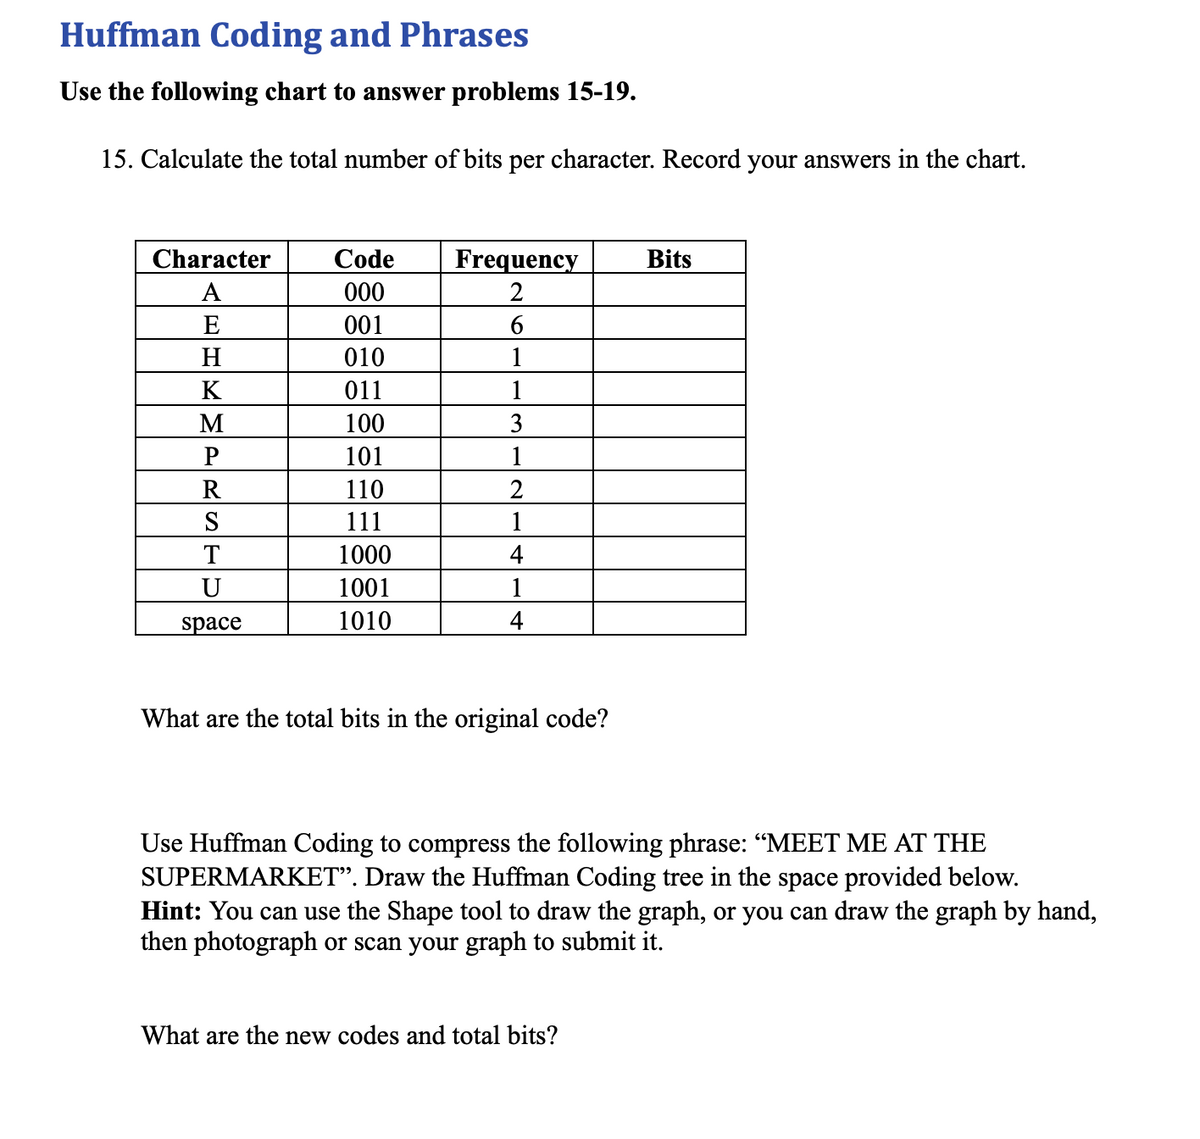 Huffman Coding and Phrases
Use the following chart to answer problems 15-19.
15. Calculate the total number of bits per character. Record your answers in the chart.
Character
Code
Frequency
Bits
A
000
E
001
6.
H
010
1
K
011
1
M
100
3
101
1
R
110
S
111
1
T
1000
4
U
1001
1
space
1010
4
What are the total bits in the original code?
Use Huffman Coding to compress the following phrase: "MEET ME AT THE
SUPERMARKET". Draw the Huffman Coding tree in the space provided below.
Hint: You can use the Shape tool to draw the graph, or you can draw the graph by hand,
then photograph or scan your graph to submit it.
What are the new codes and total bits?
